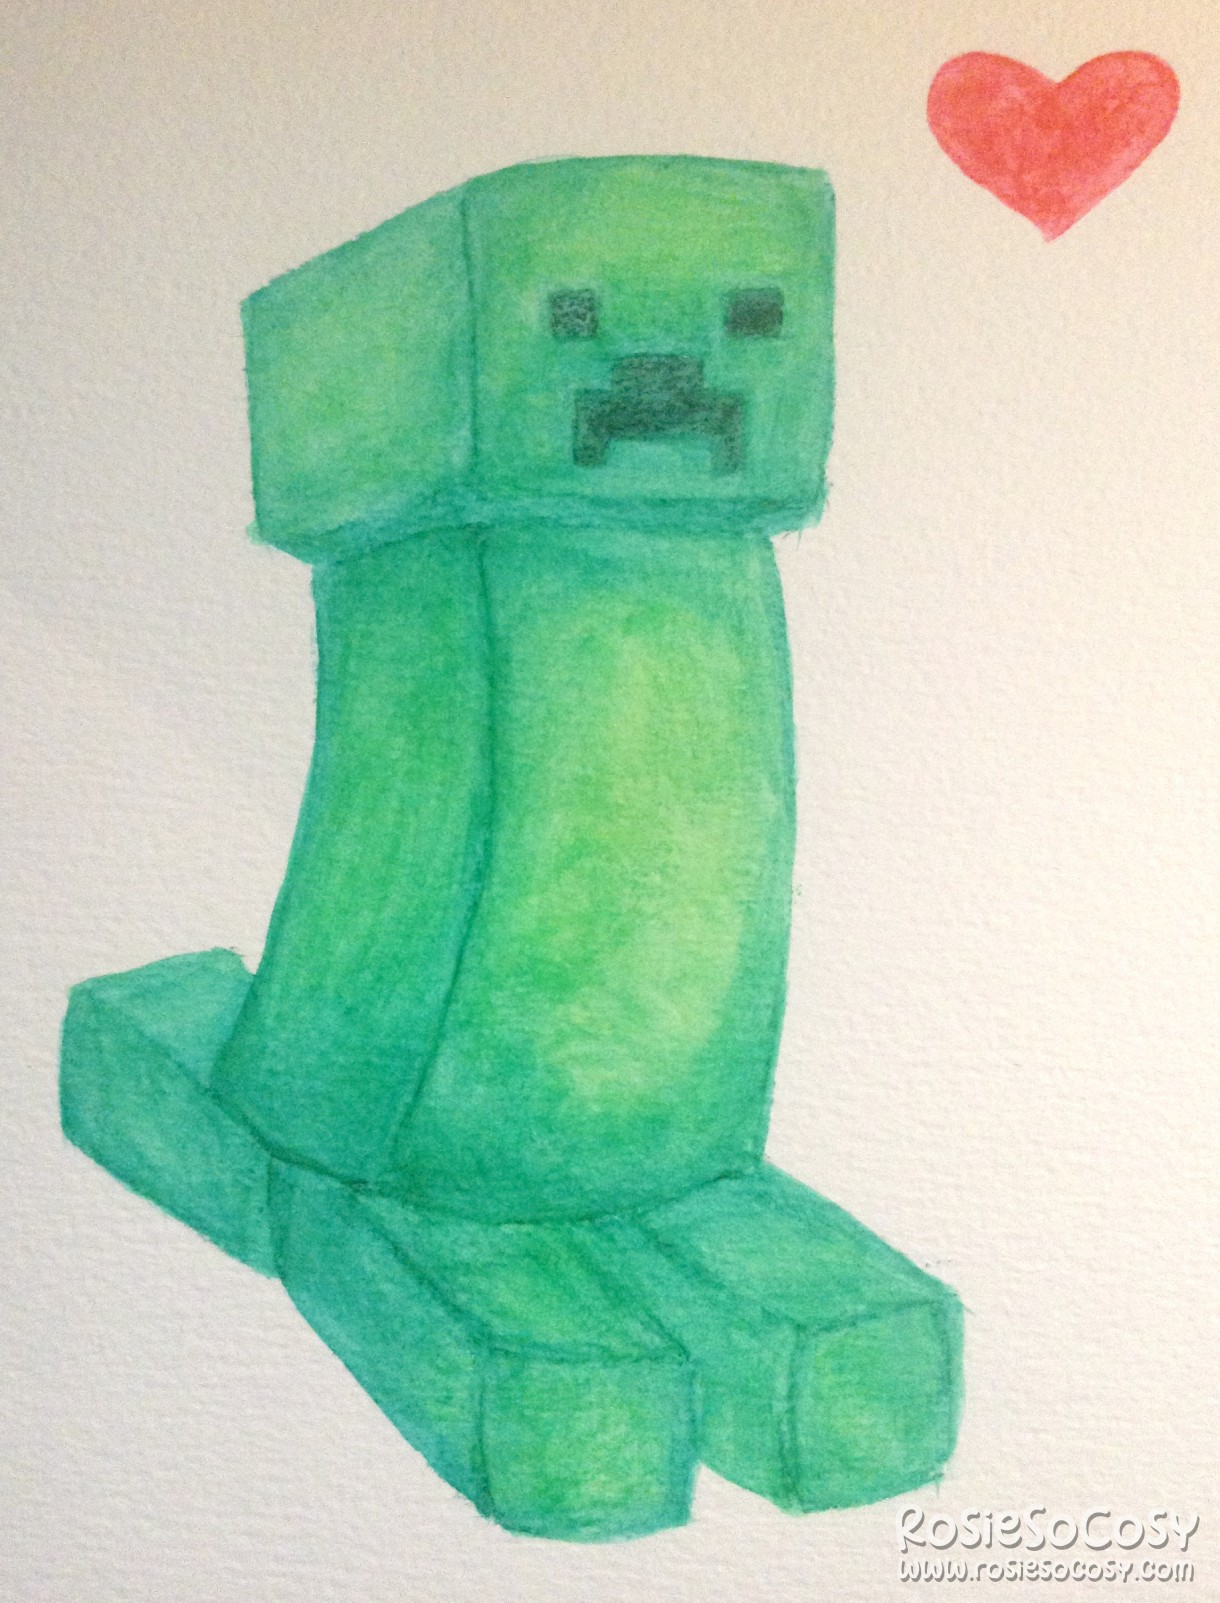 A creeper from Minecraft done in watercolour. The creeper is a green, tall character from Minecraft. Despite its deadly character, there is a small red heart next to it.